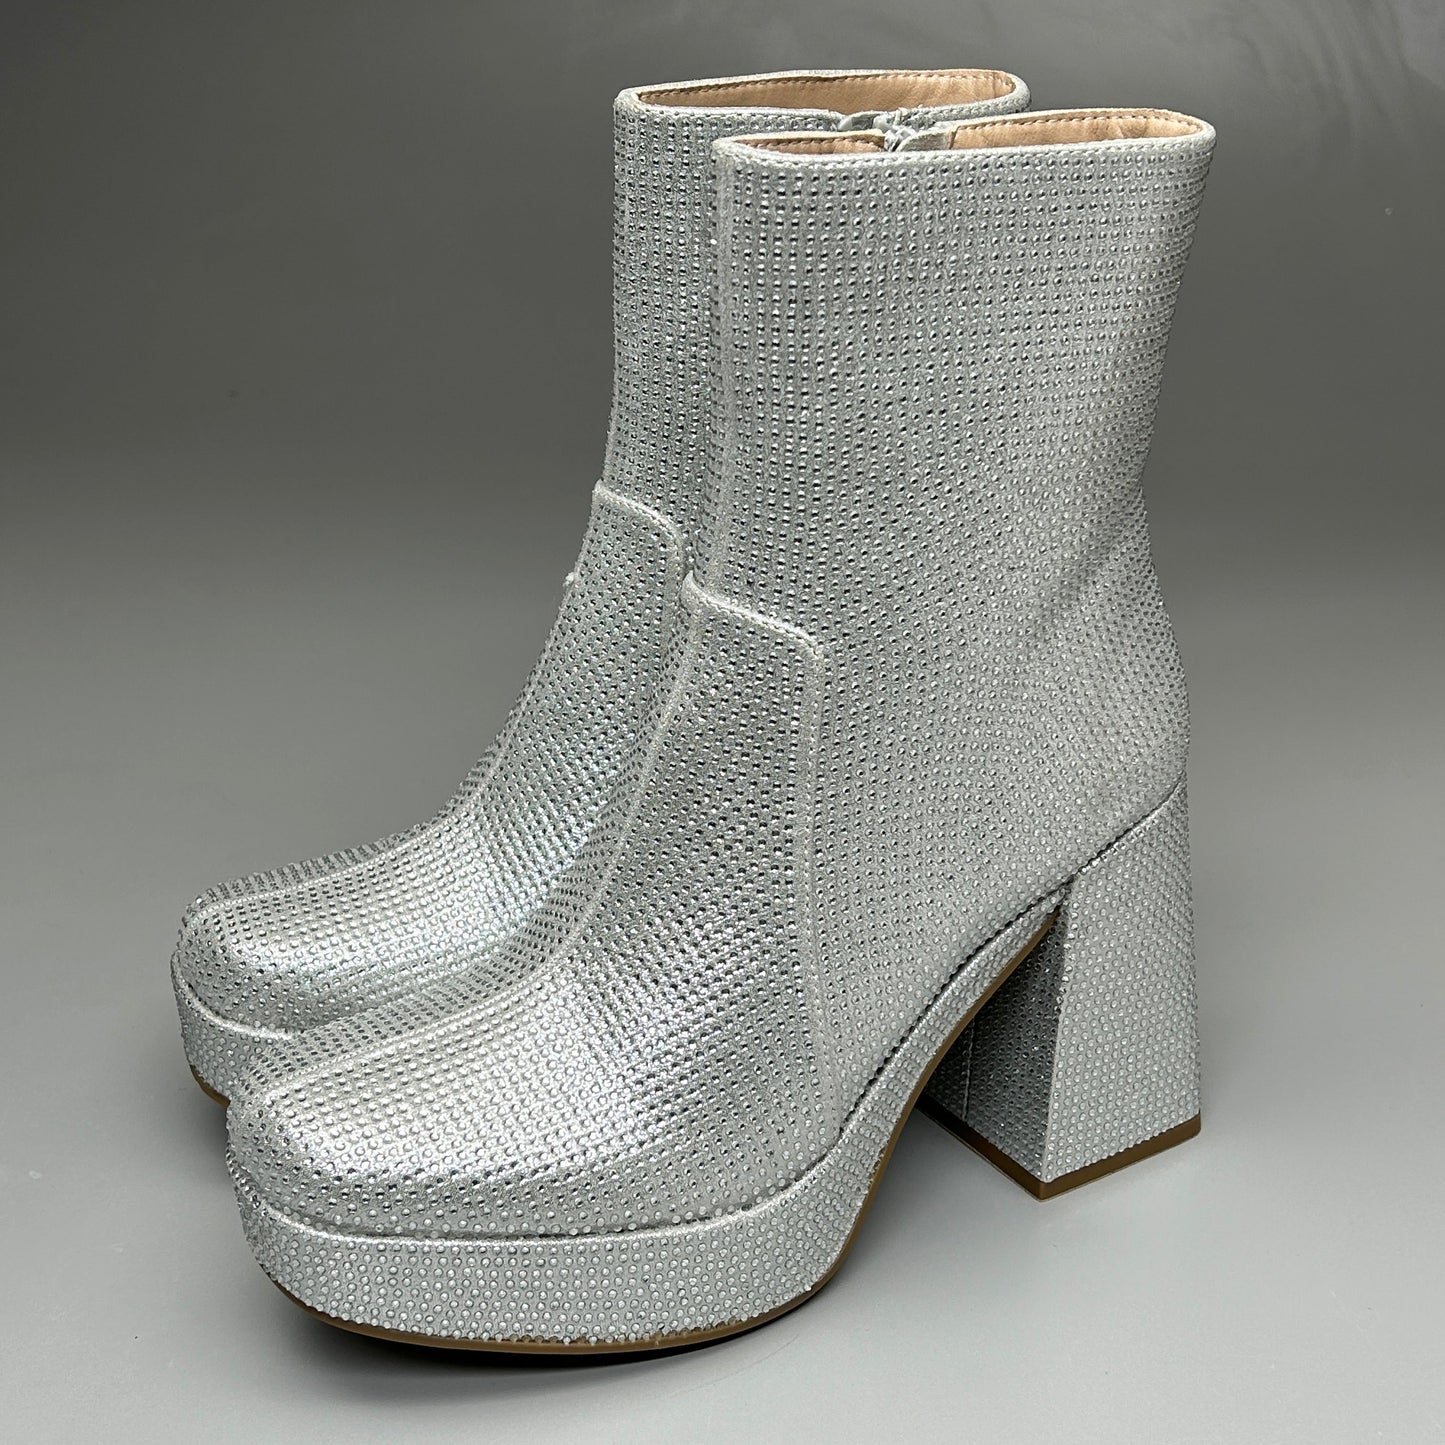 MIA Iva Silver Stone Heeled Boots Women's Sz 6.5 Silver GS1253108 (New)